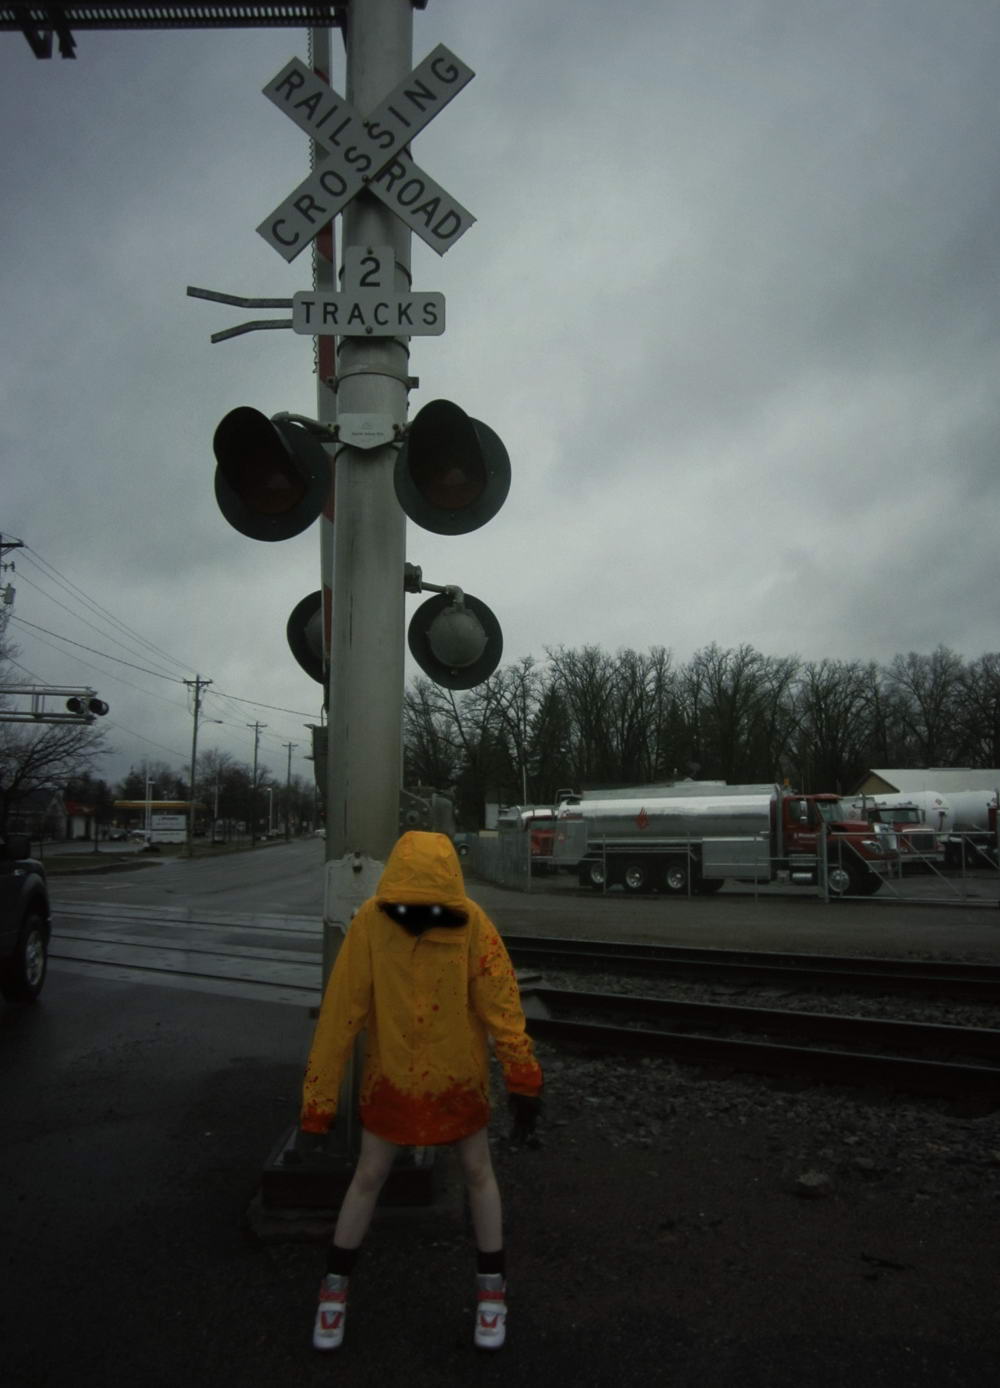 wtf images - demonic child standing next to railroad